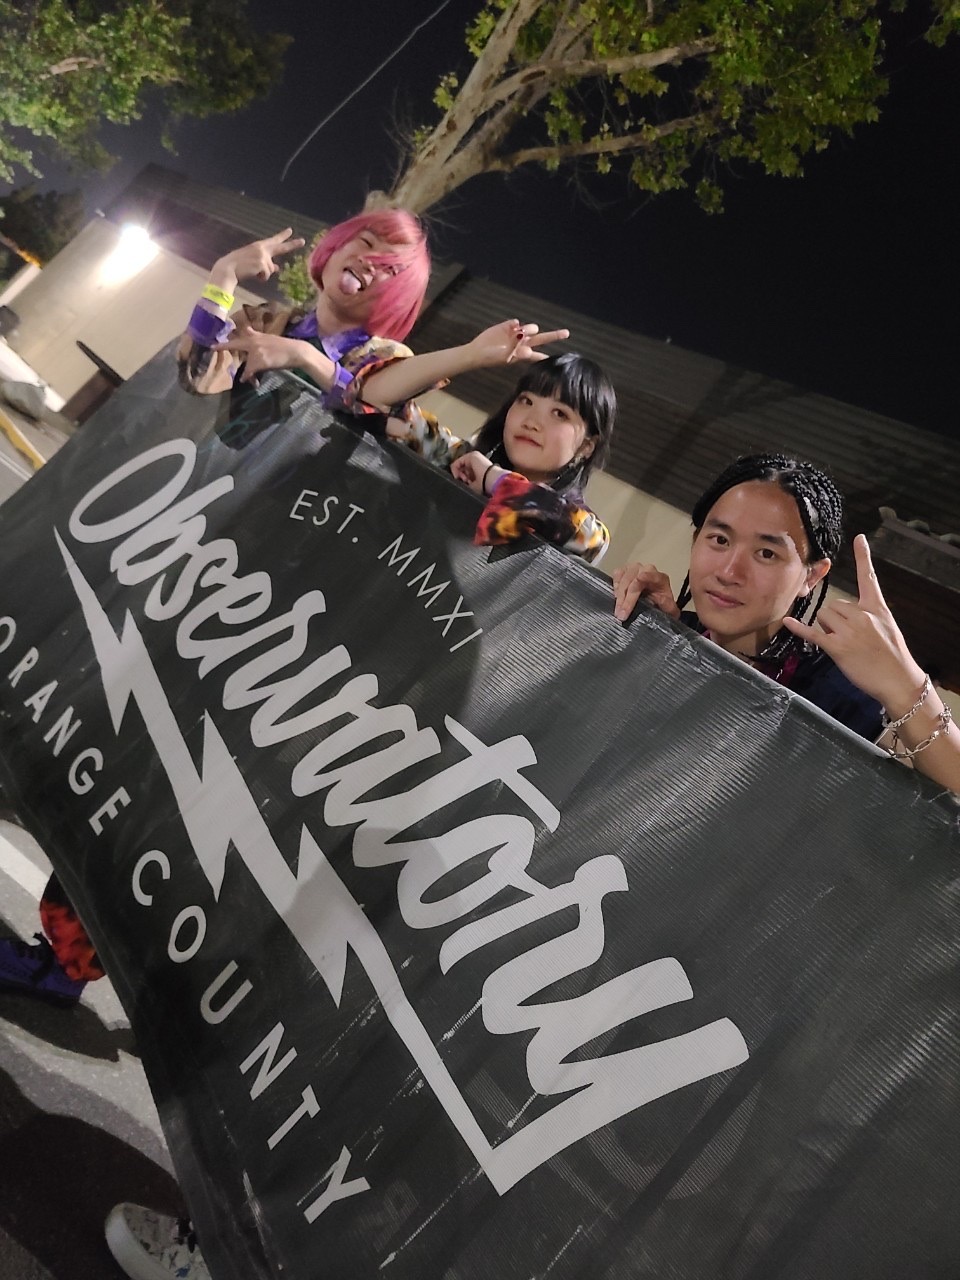 Japanese metal band ASTERISM in New York City. From left to right: MIO, HAL-CA, and MIYU. Photo provided by Sony Music Entertainment Japan (SMEJ)